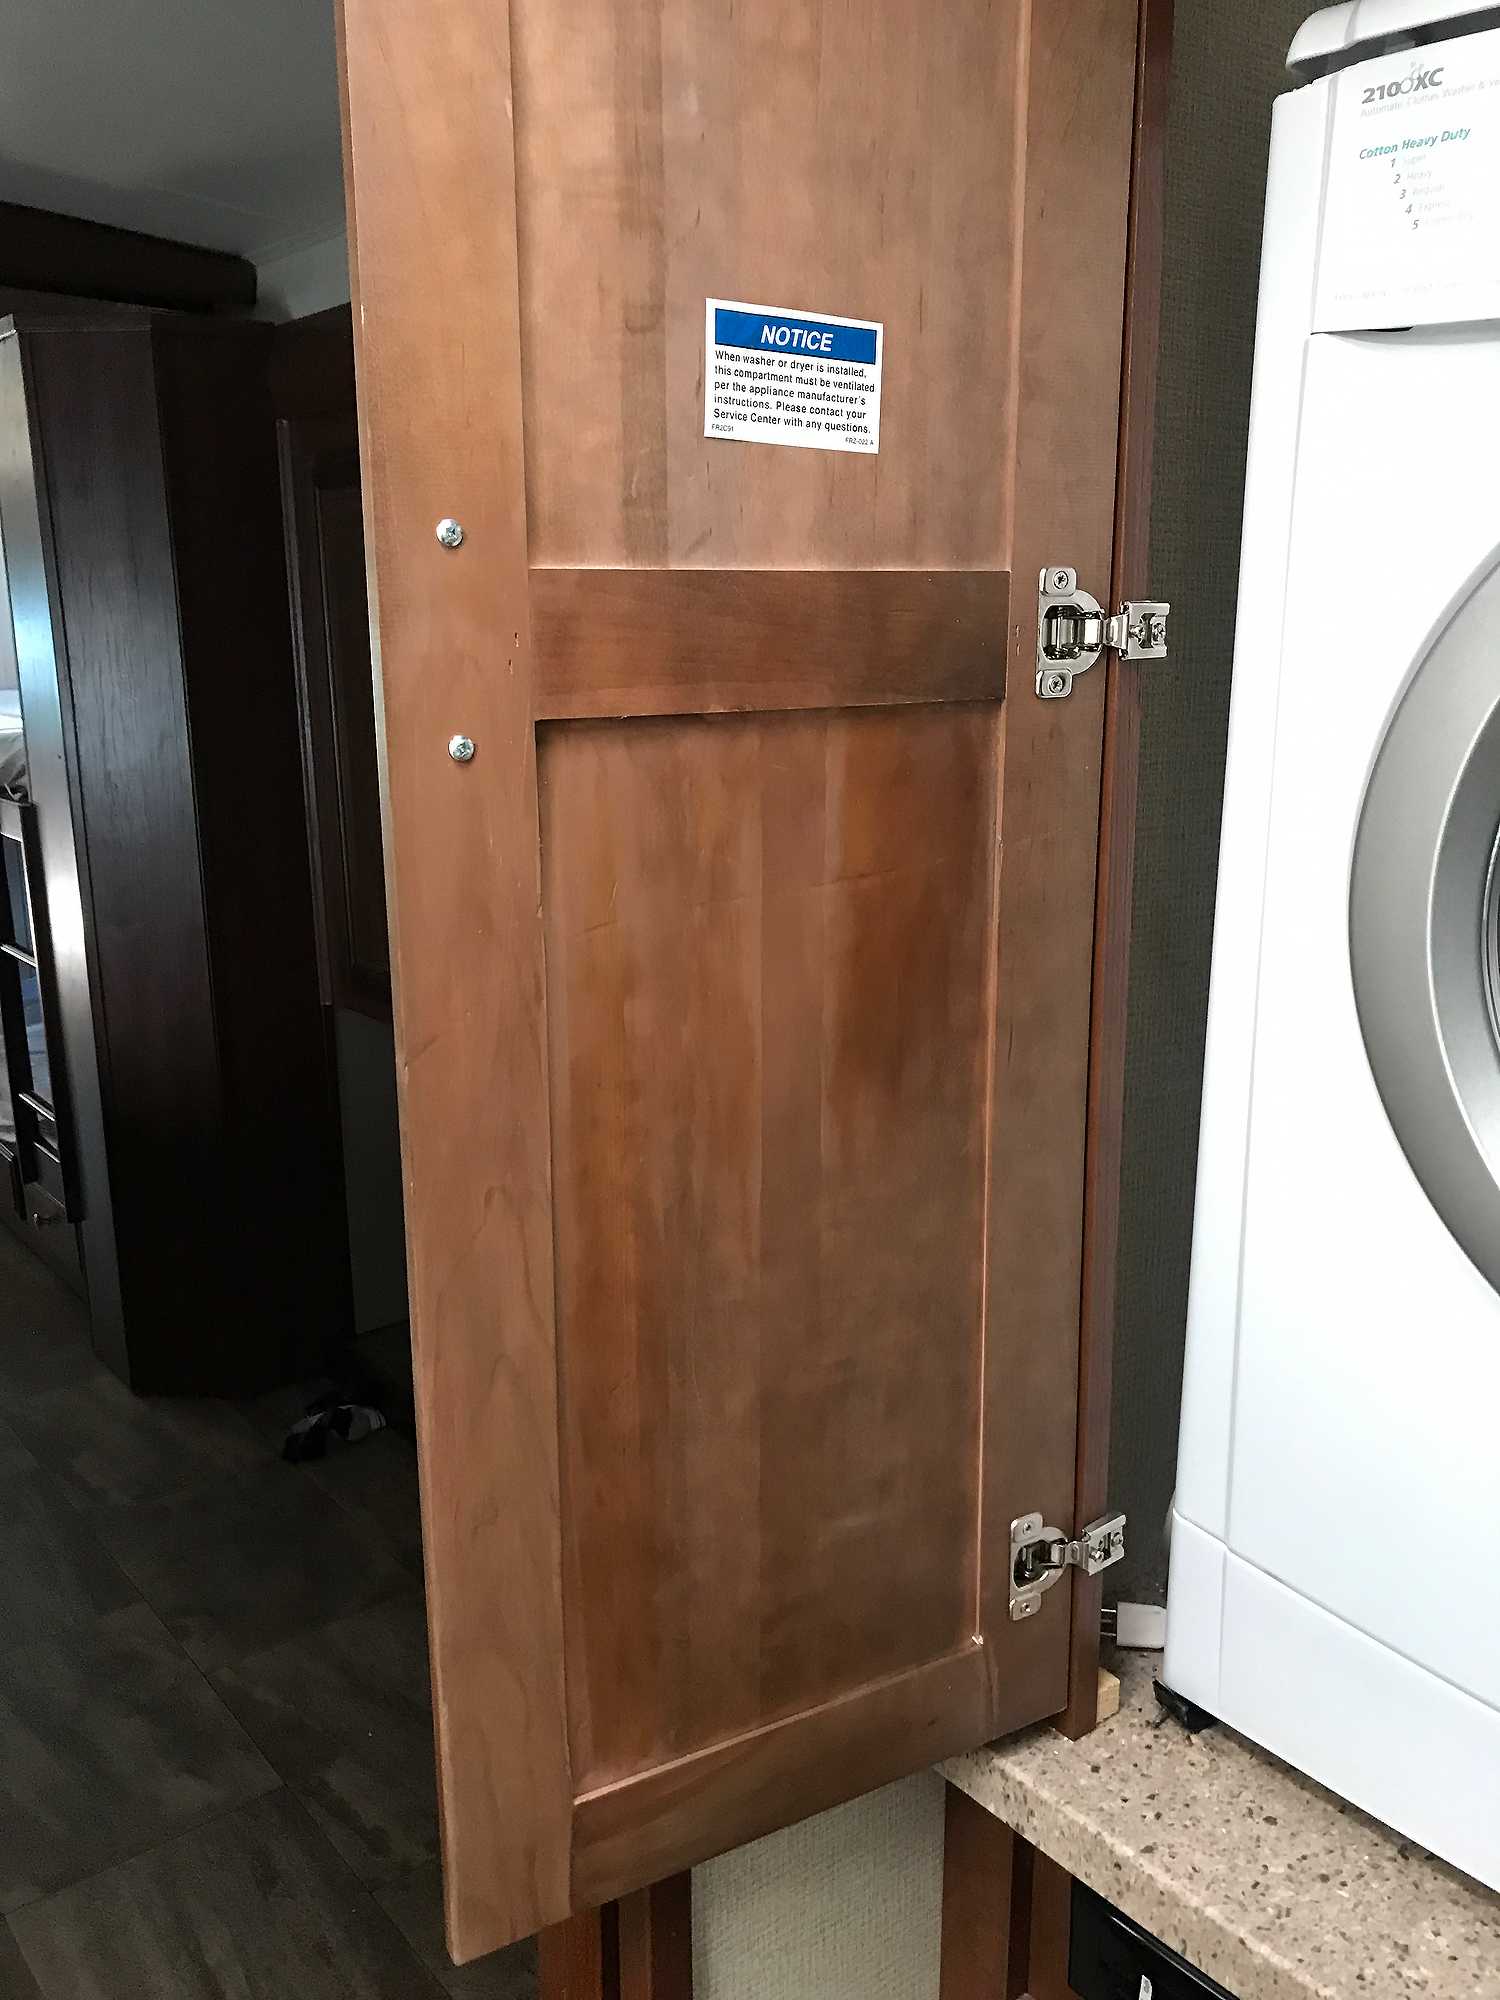 A brown cabinet door that suffered a violent break now looks like new